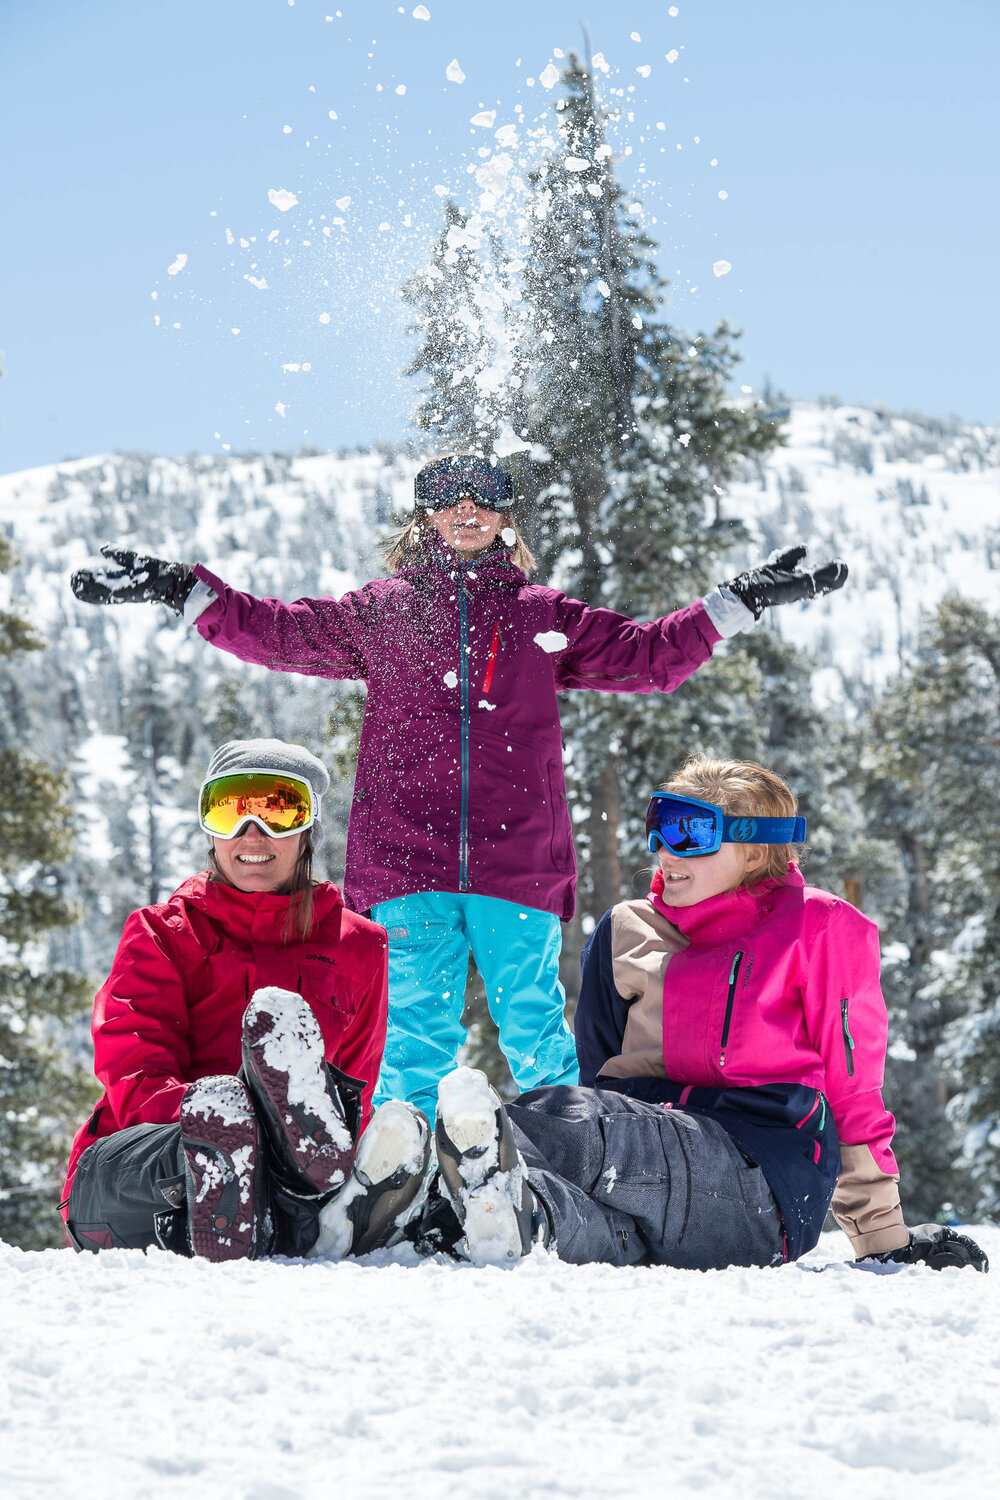  Smiles with friends at Heavenly.  Rachid Dahnoun | Courtesy Tahoe South  